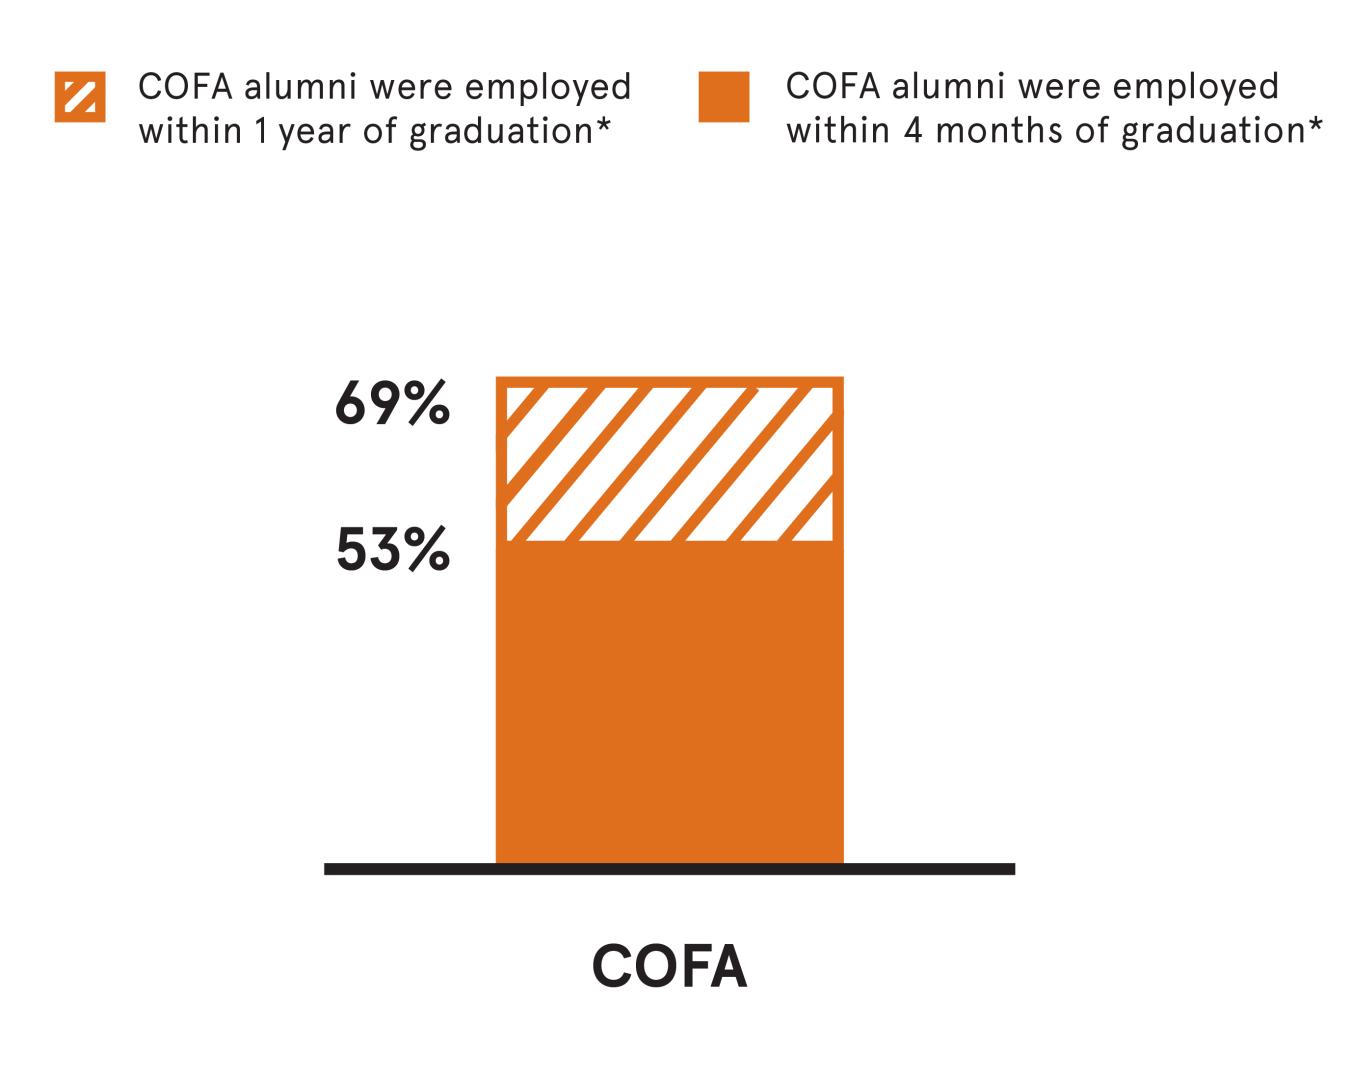 Infograph illustrating that 53% of COFA alumni were employed within 4 months of graduation and 69% of COFA alumni were employed within 1 year of graduation